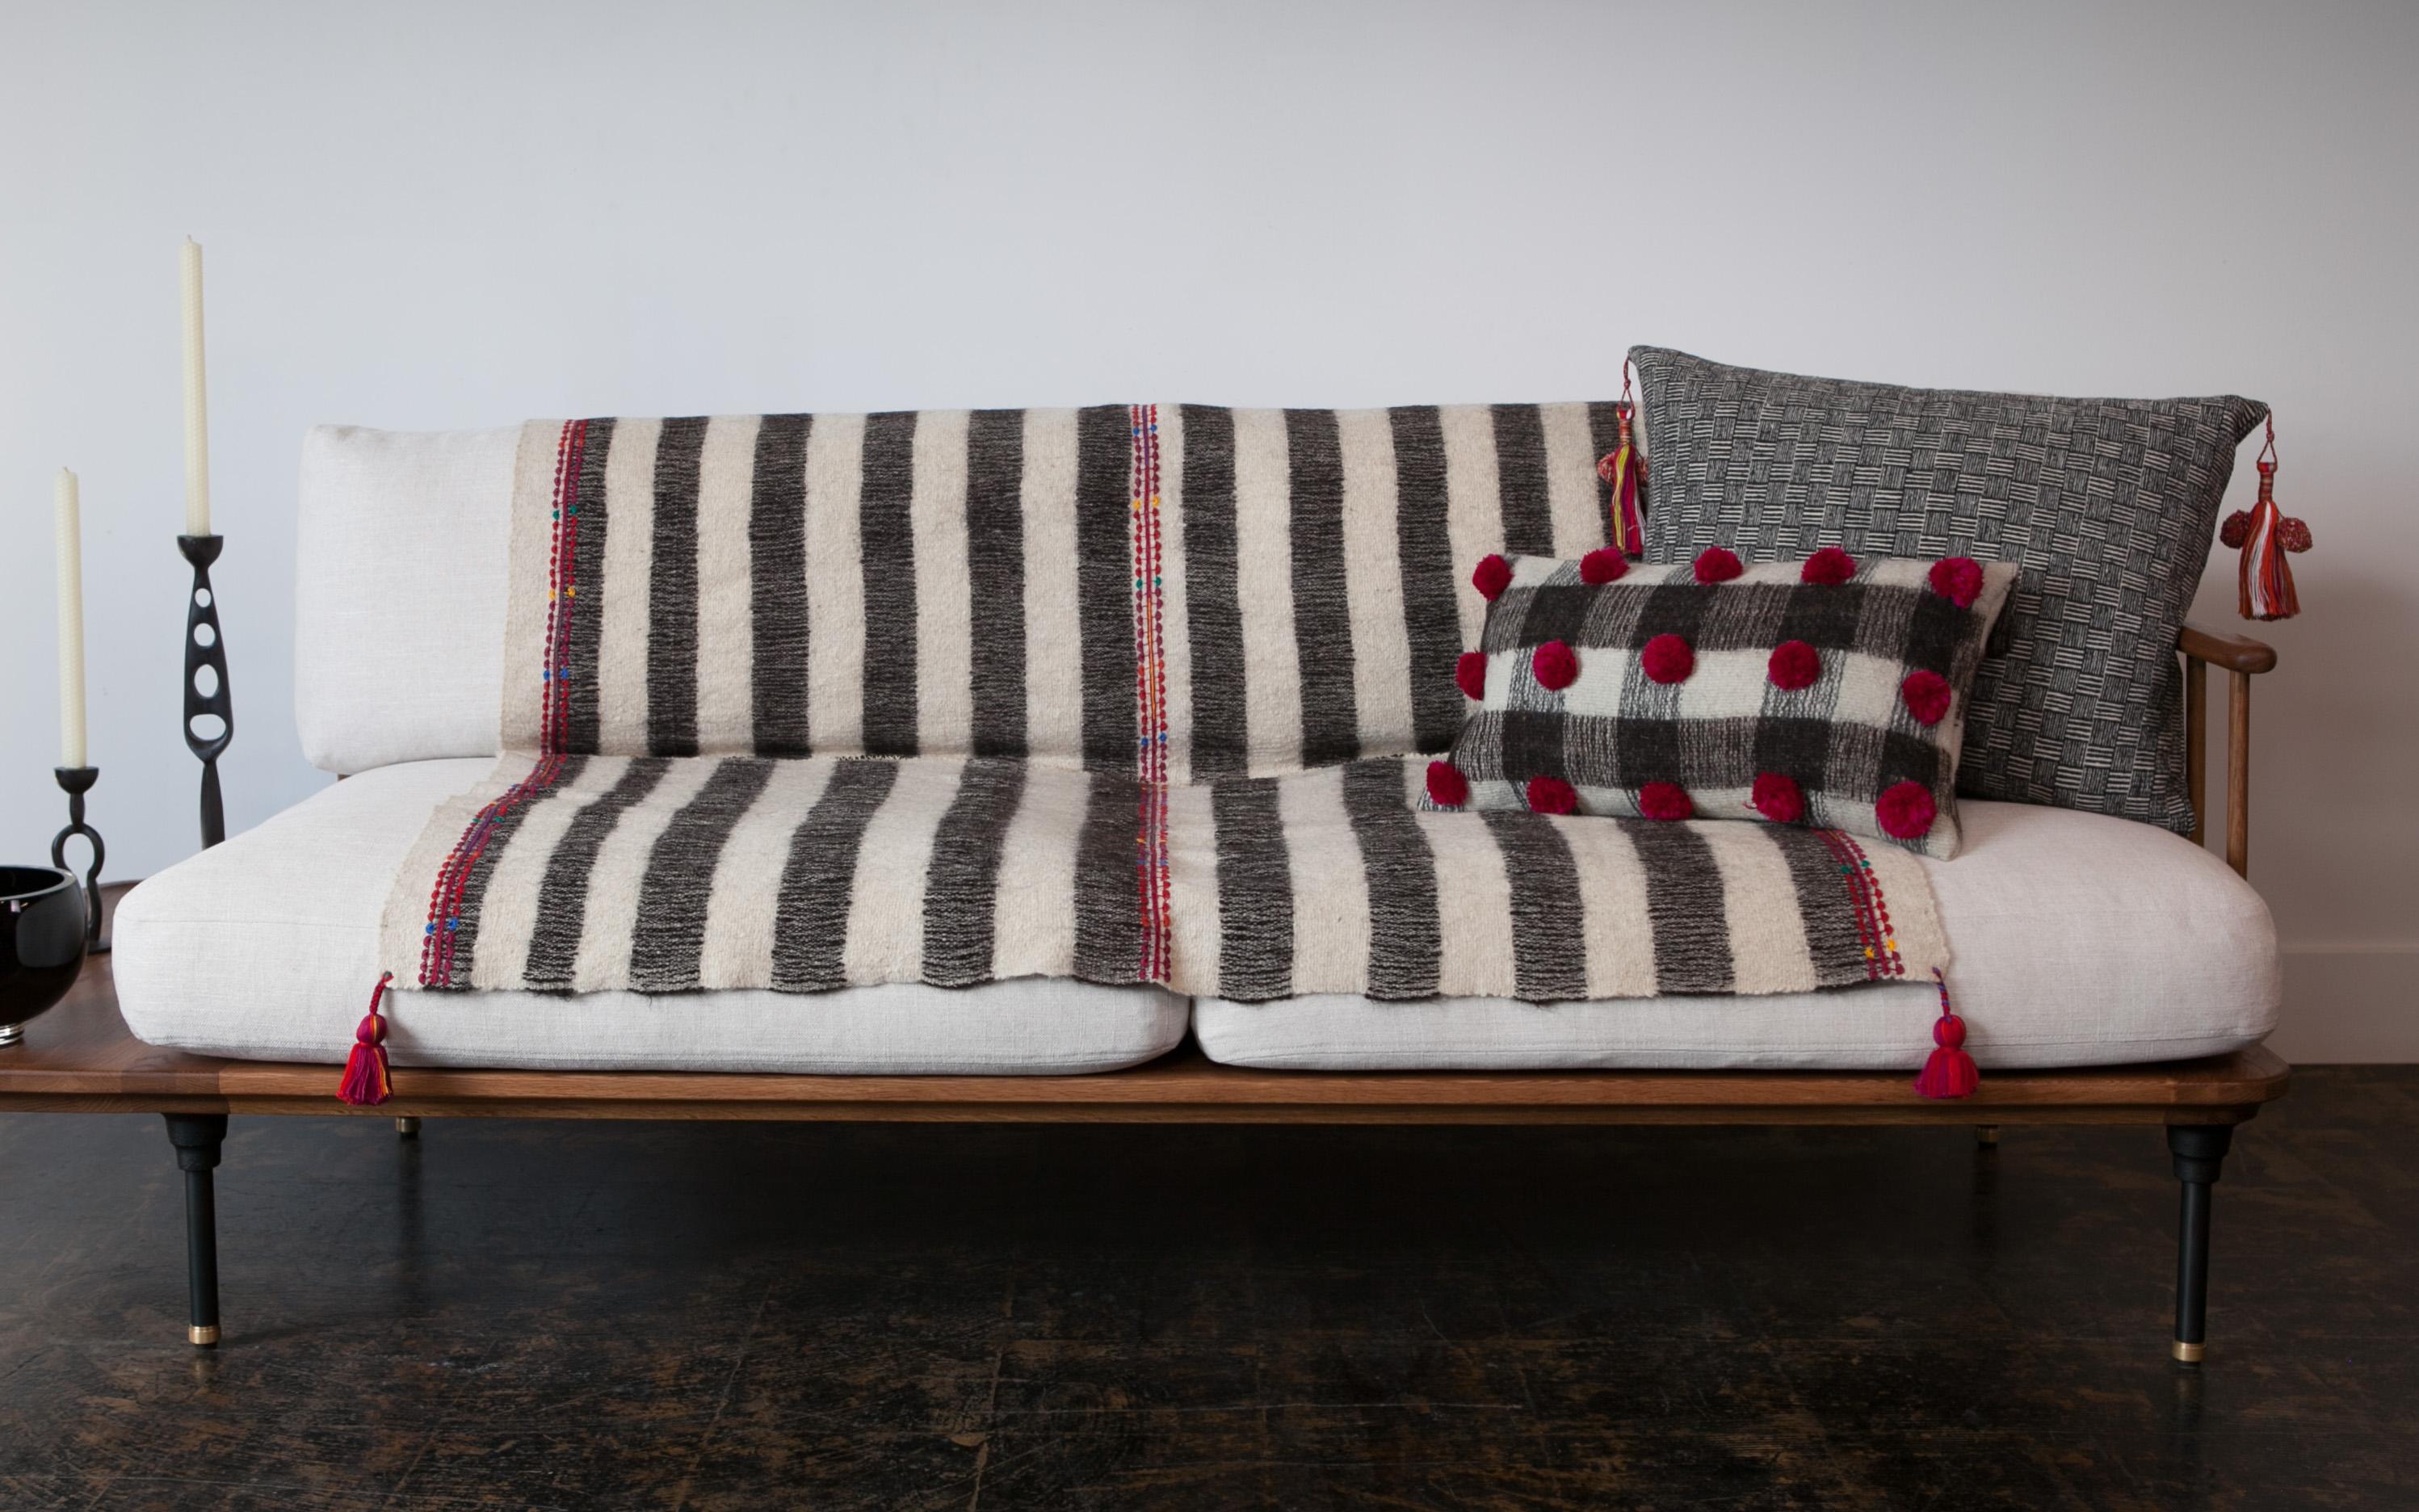 Handwoven on backstrap looms in Chamula, Chiapas, the textile of this delightful throw is made 100% from wool sheared from Chamula Community sheep, considered sacred in local culture, embroidered and decorated with red pompoms dyed with cochineal.